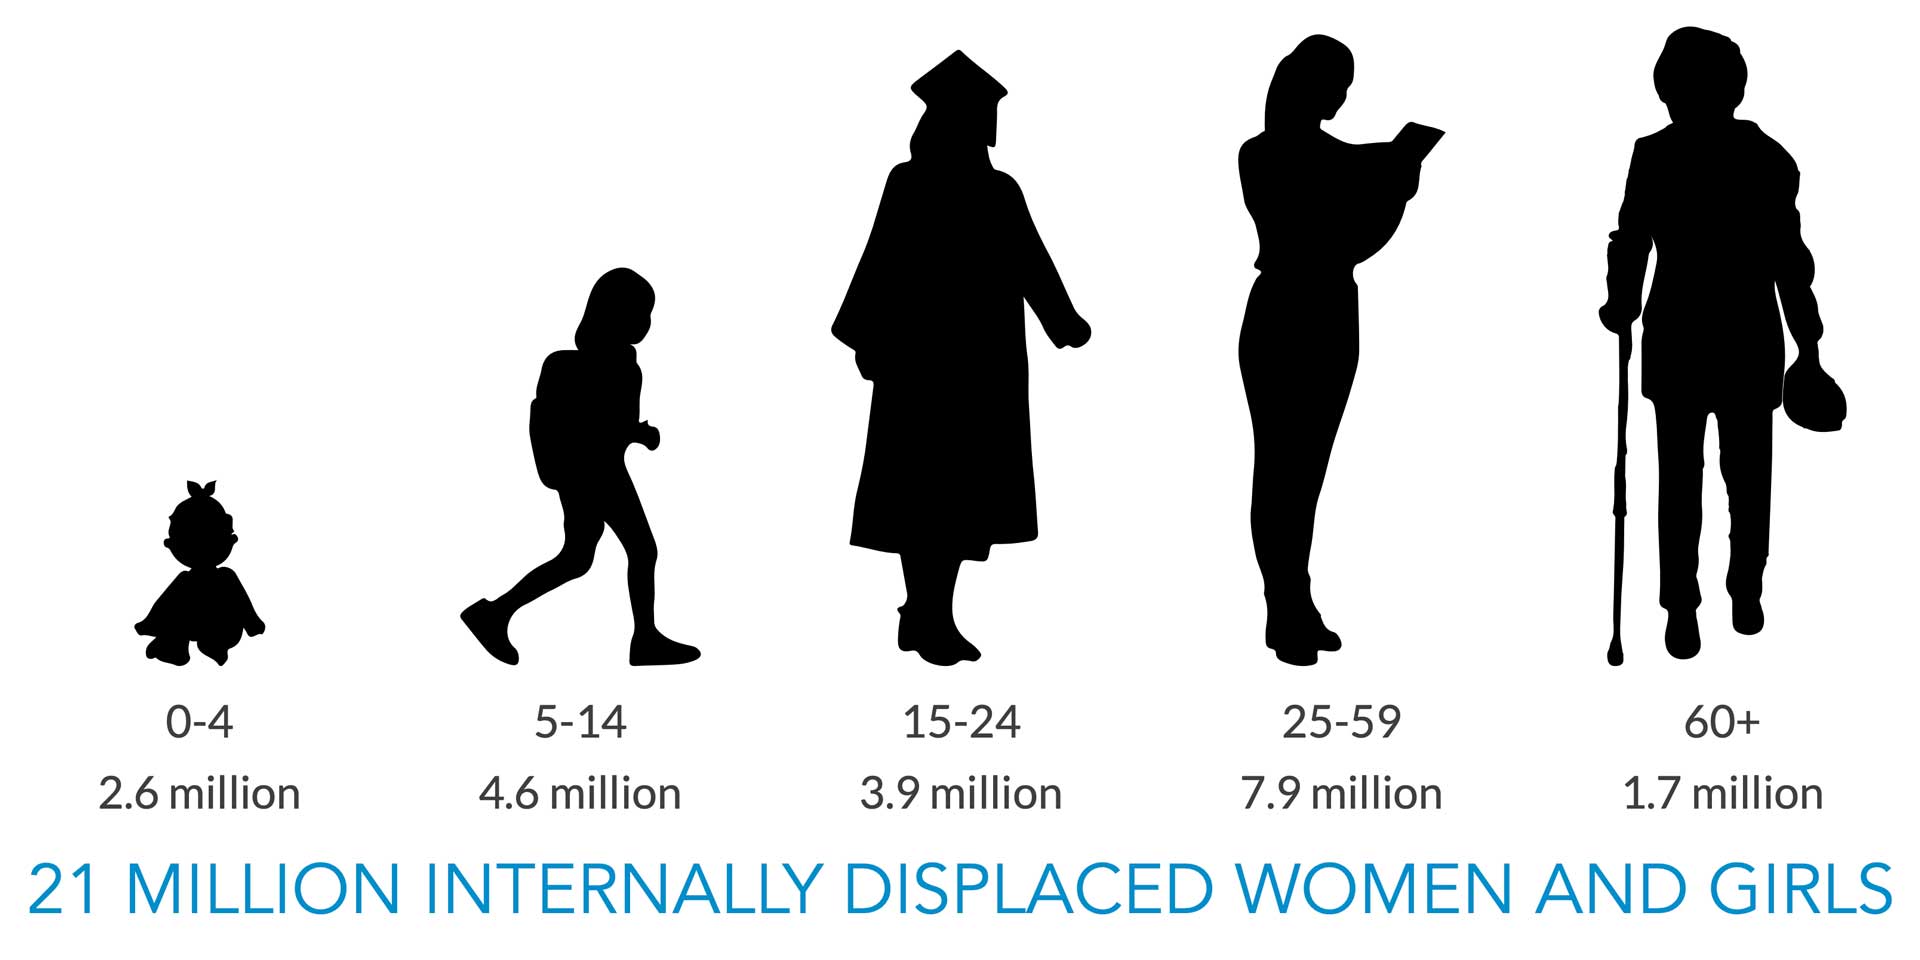 Illustration of the number of women and girls living in internal displacement as a result of conflict and violence as of the end of 2018, by age group